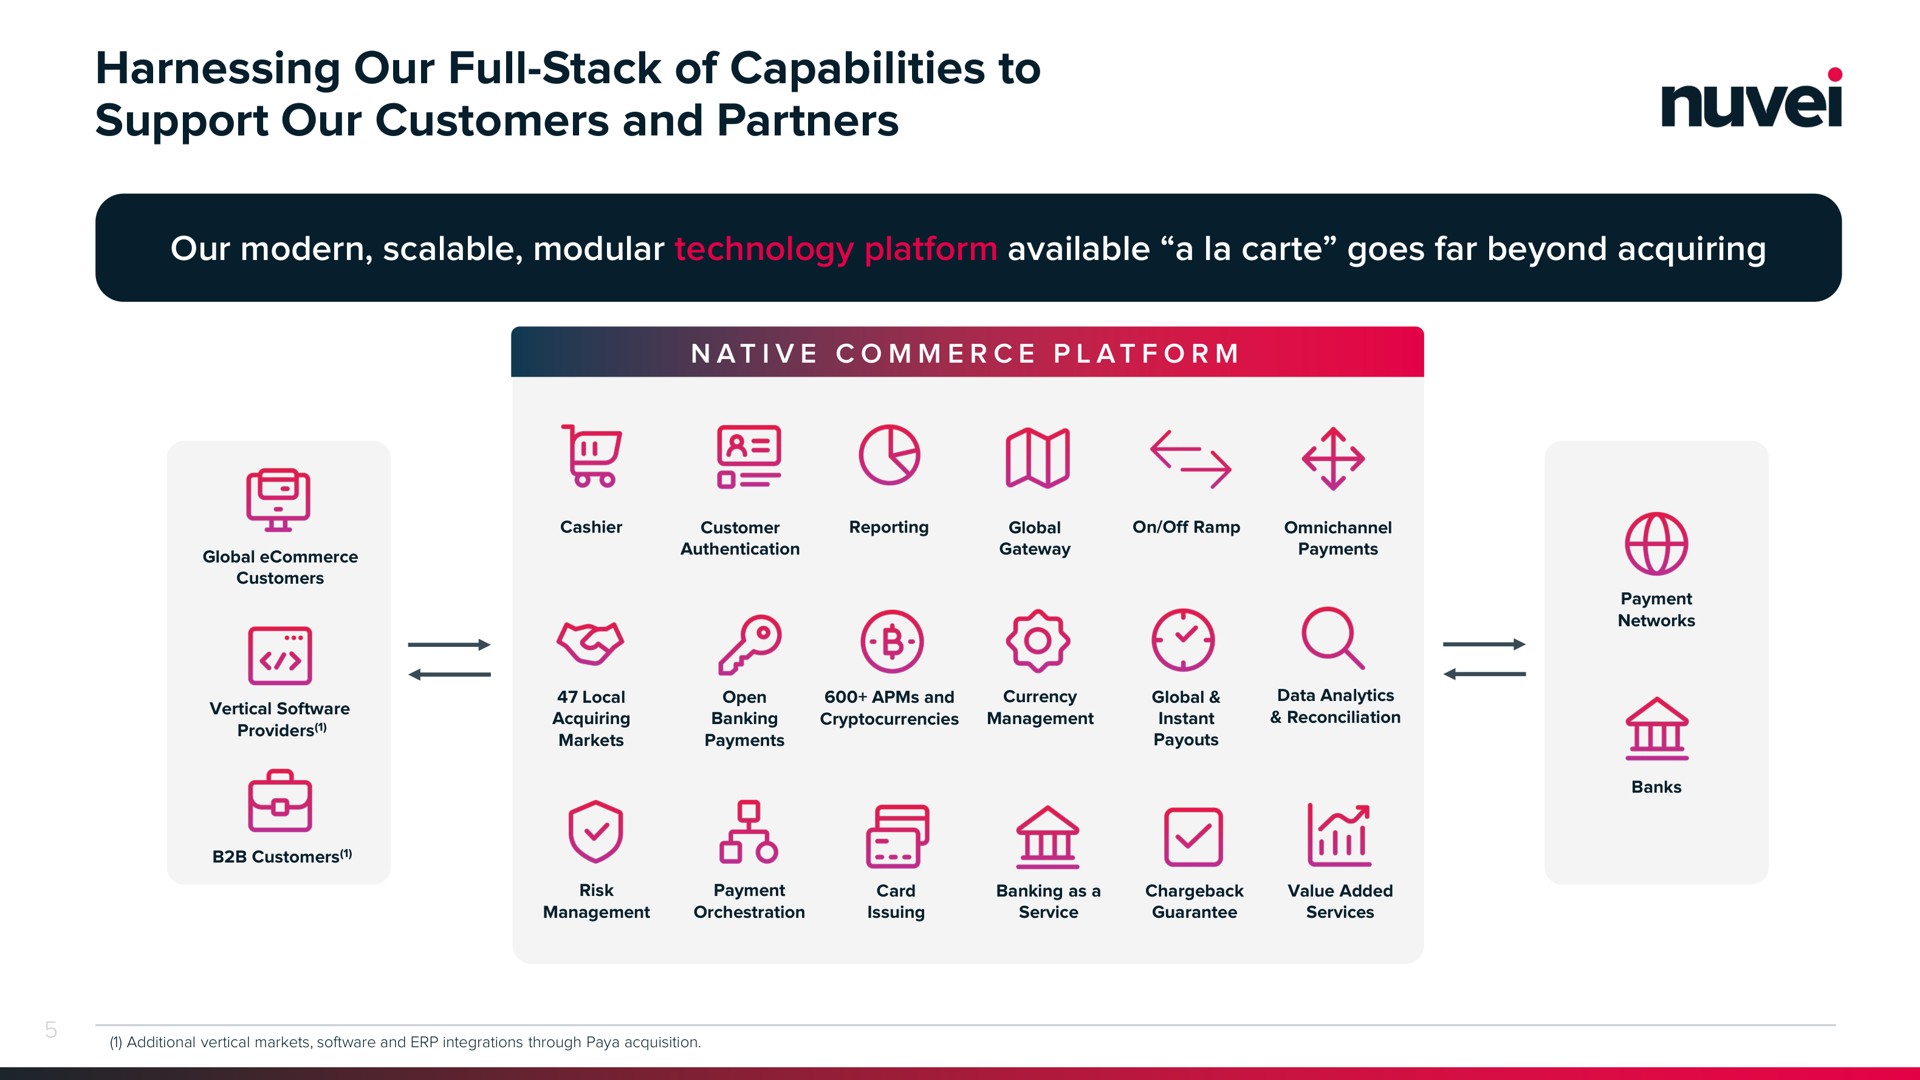 harnessing our full stack of capabilities to support our customers and partners our modern scalable modular technology platform available a carte goes far beyond acquiring | Nuvei